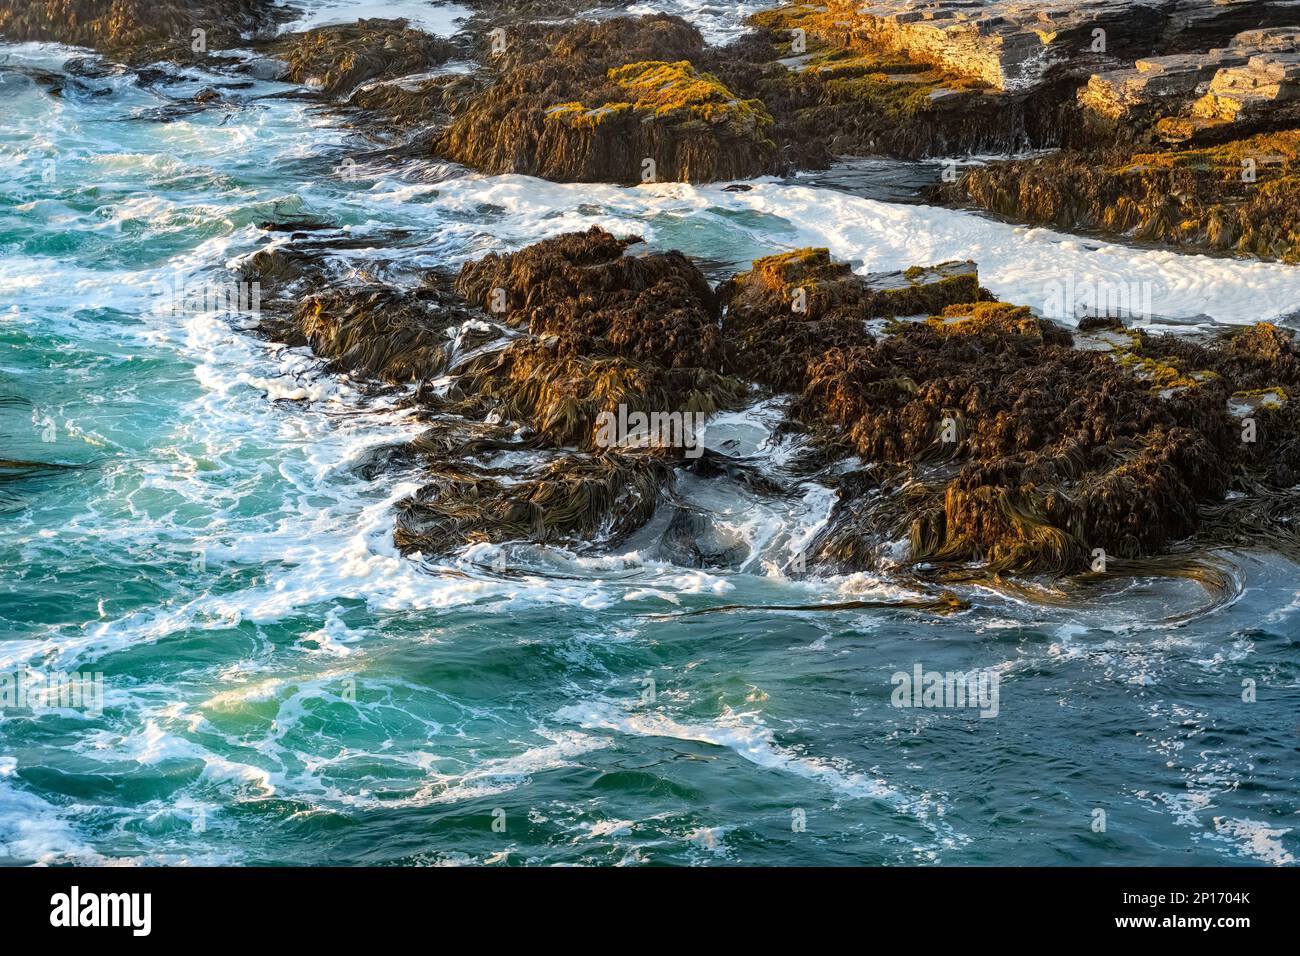 Cochayuyo a typical specie of seaweed found in the coast of Chile. Stock Photo